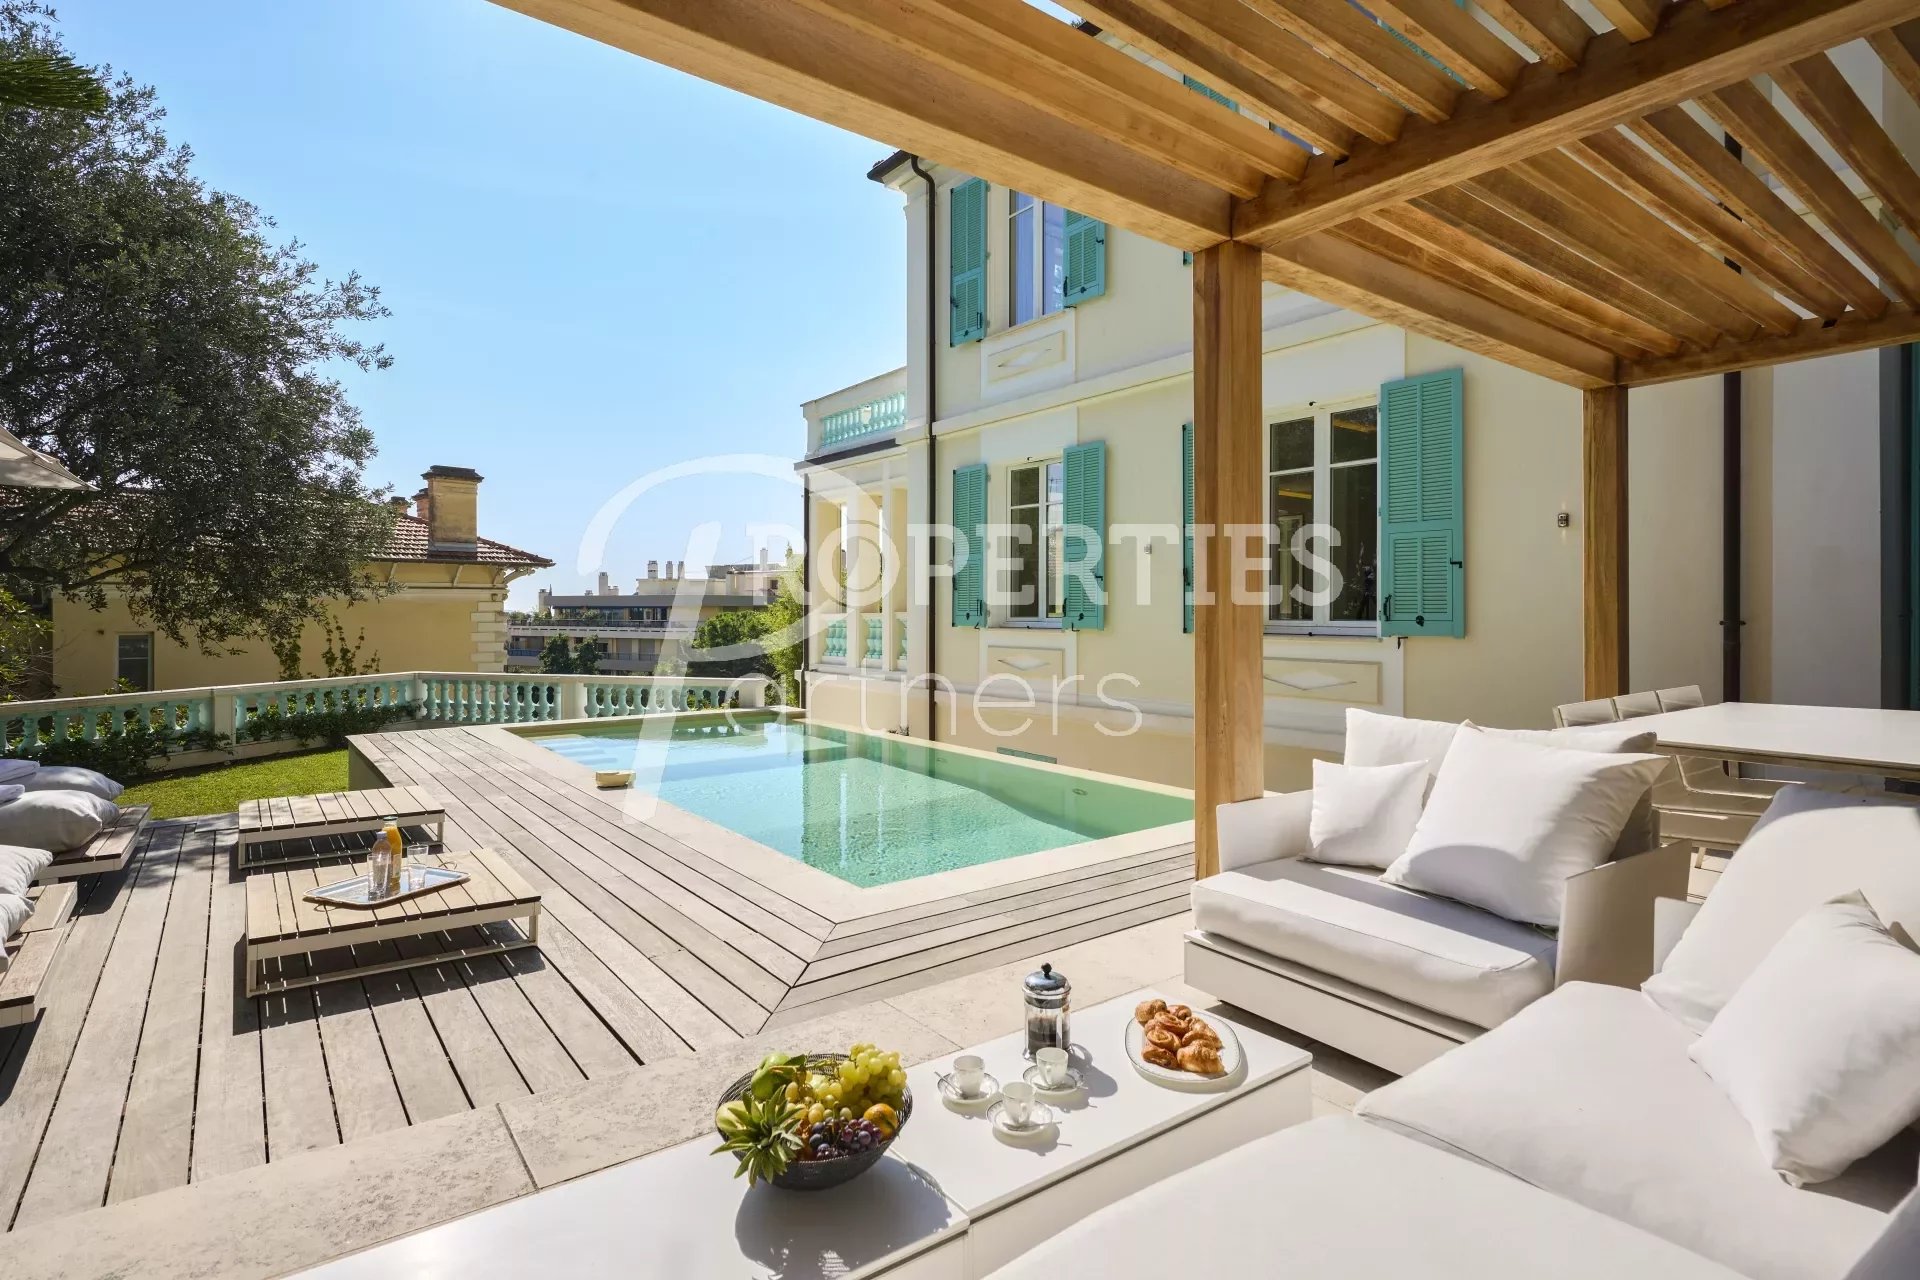 "Belle Epoque" style property - in Beaulieu